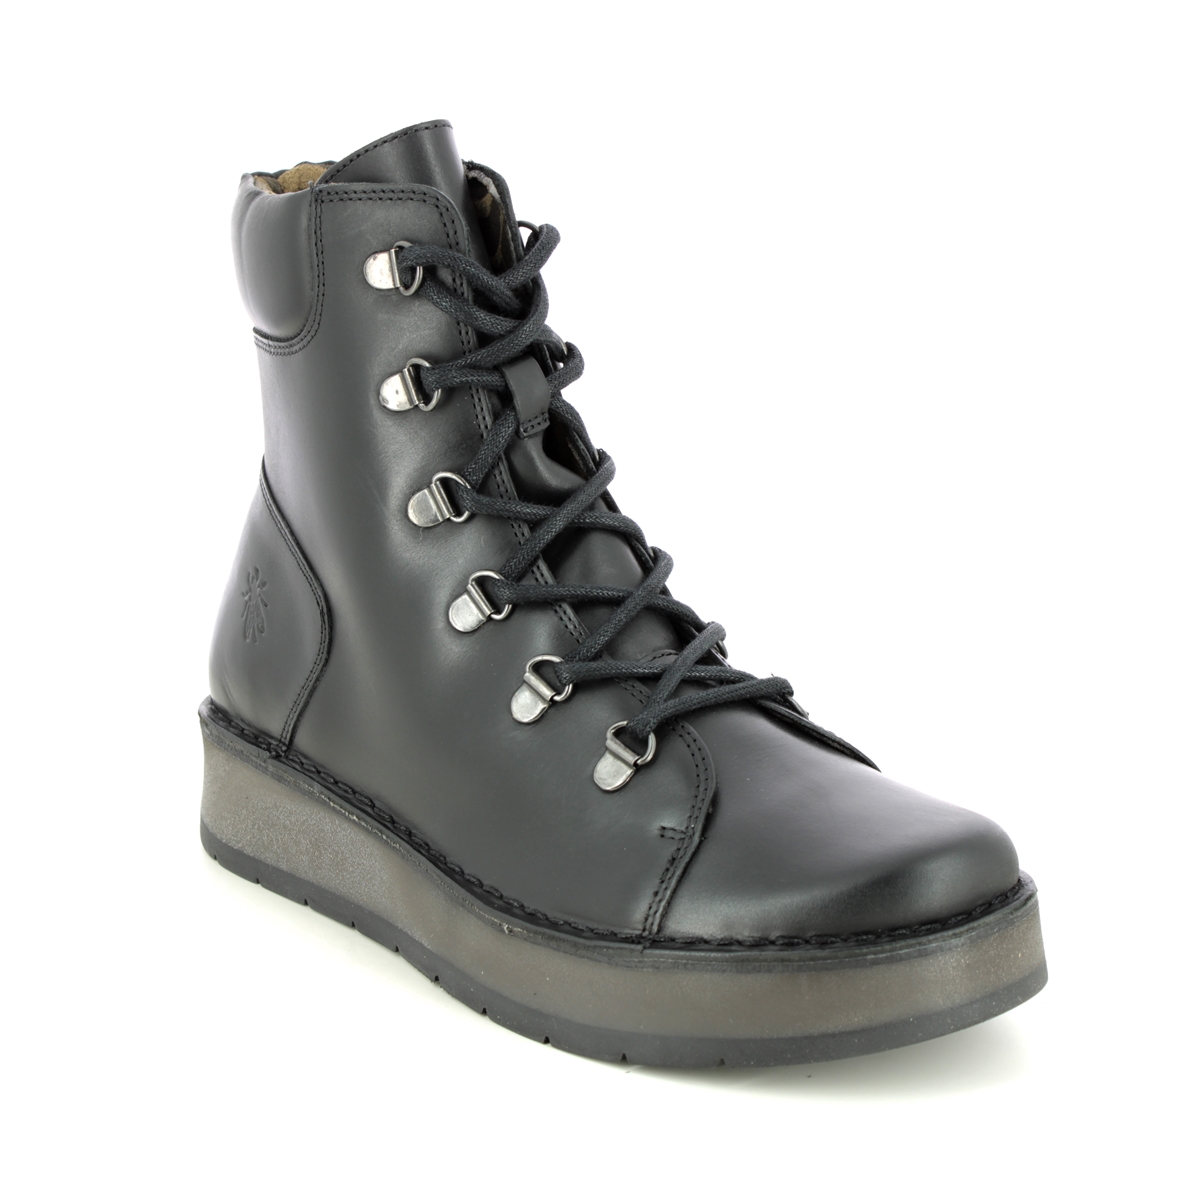 Fly London Roxy Ravi Black leather Womens Lace Up Boots P211094-000